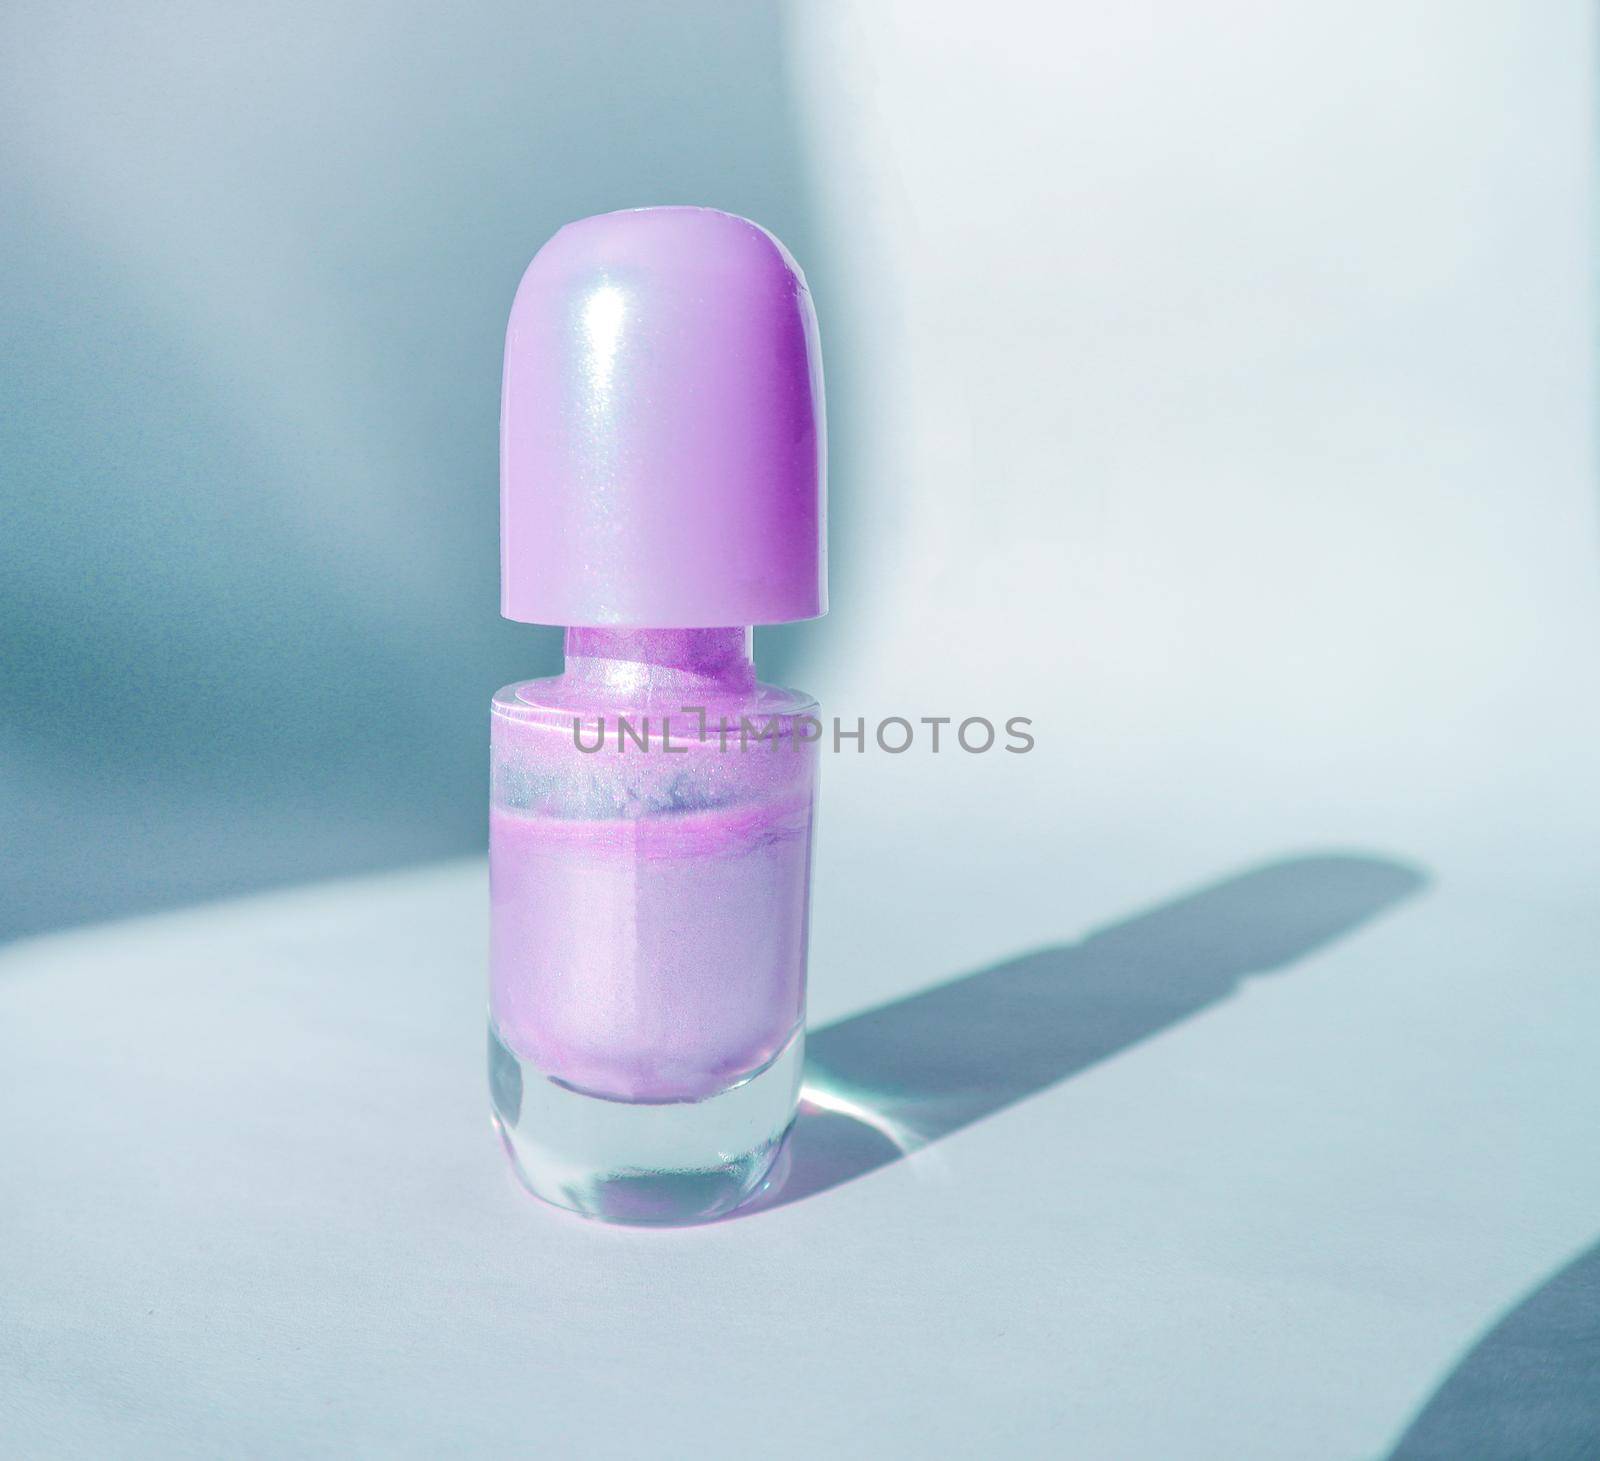 One bottle of purple nail polish on a white surface with shadow, a fashionable beauty concept.